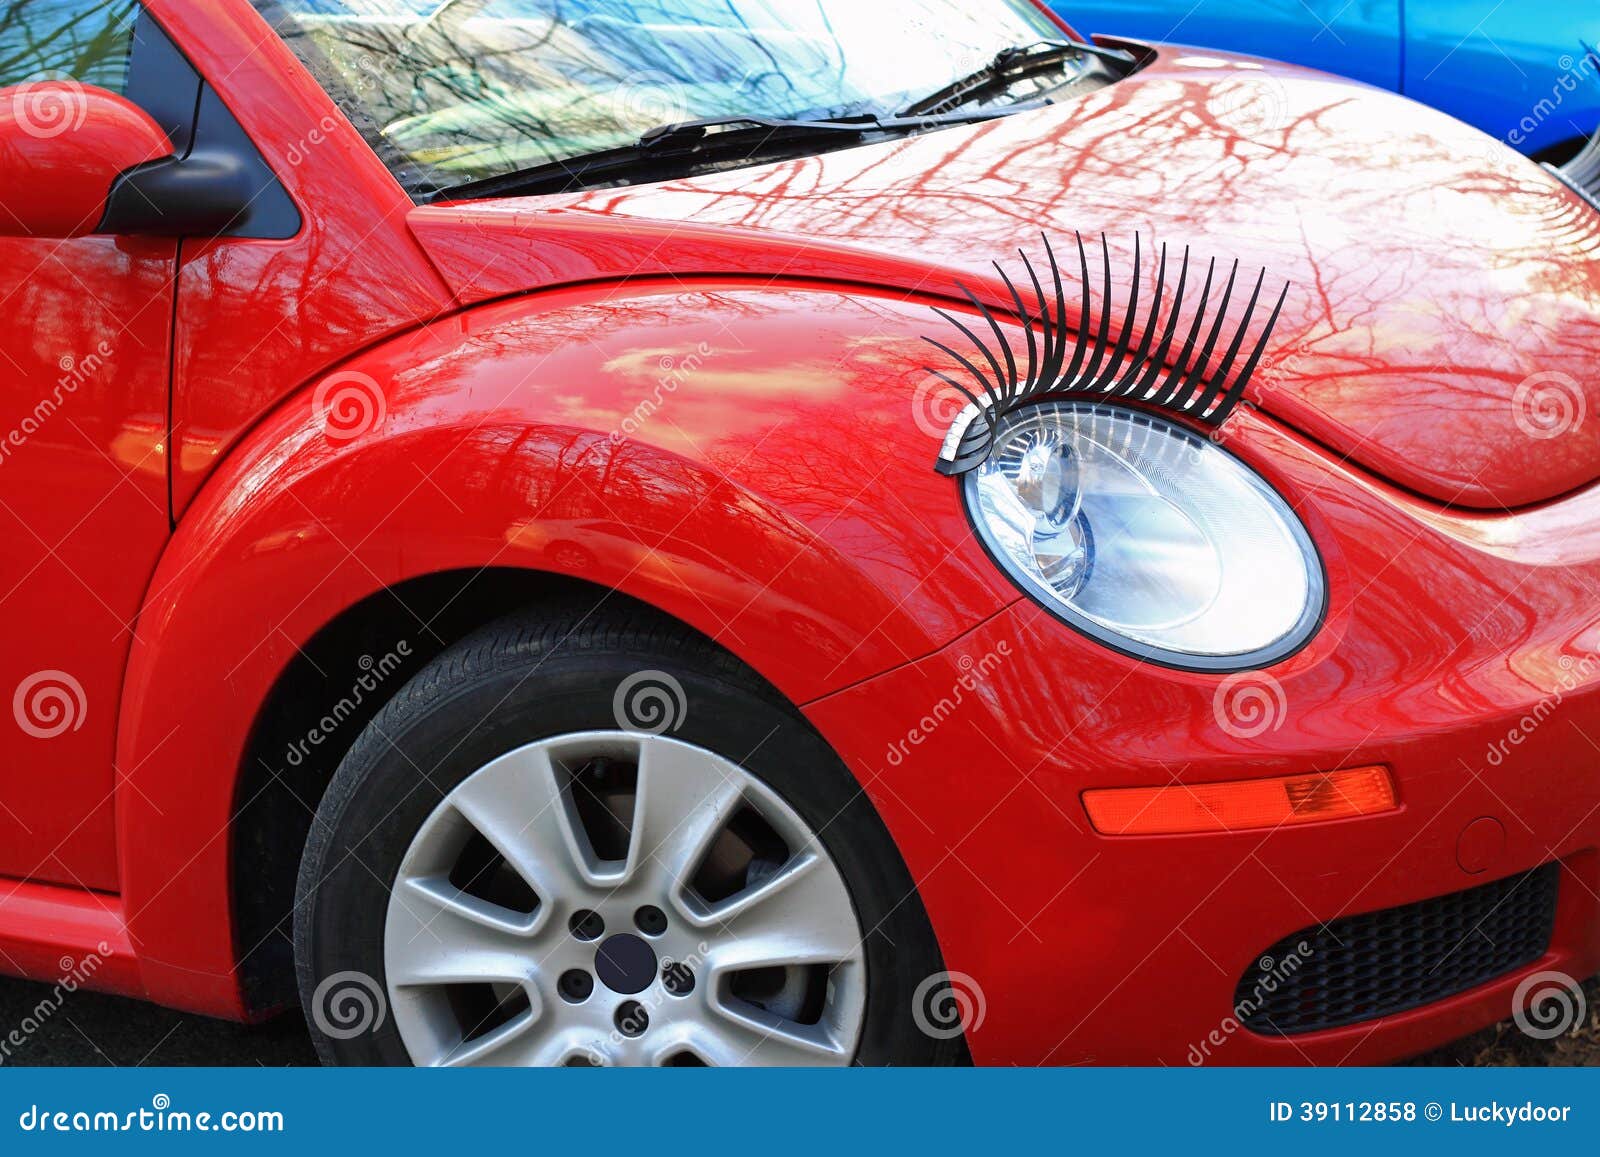 97 fotos e imágenes de Cars With Eyelashes - Getty Images